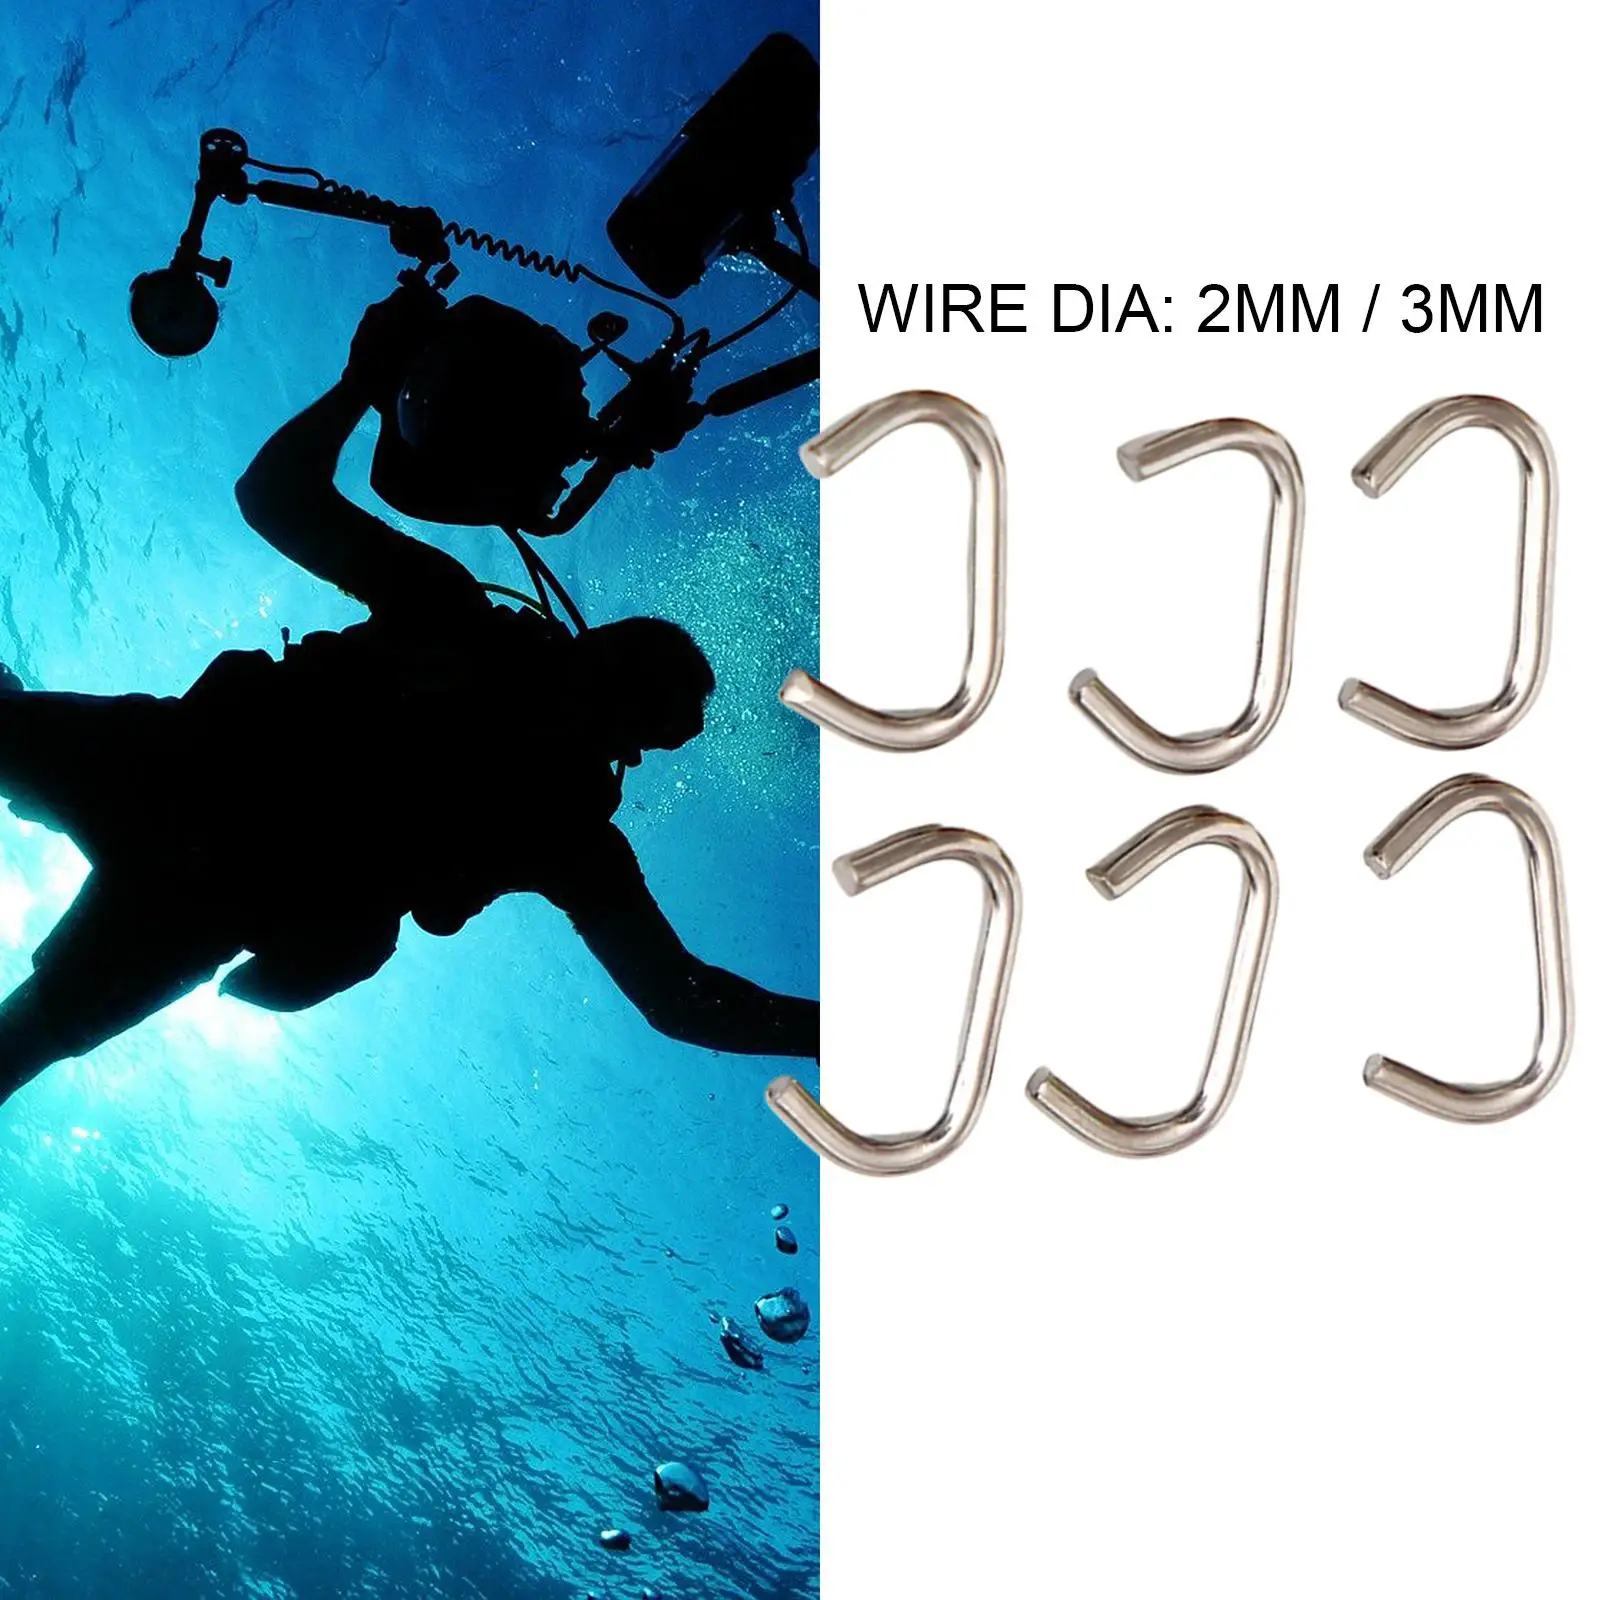 6 Pieces Scuba Diving Bungee Clips Stainless Steel Sidemount Rope Holder